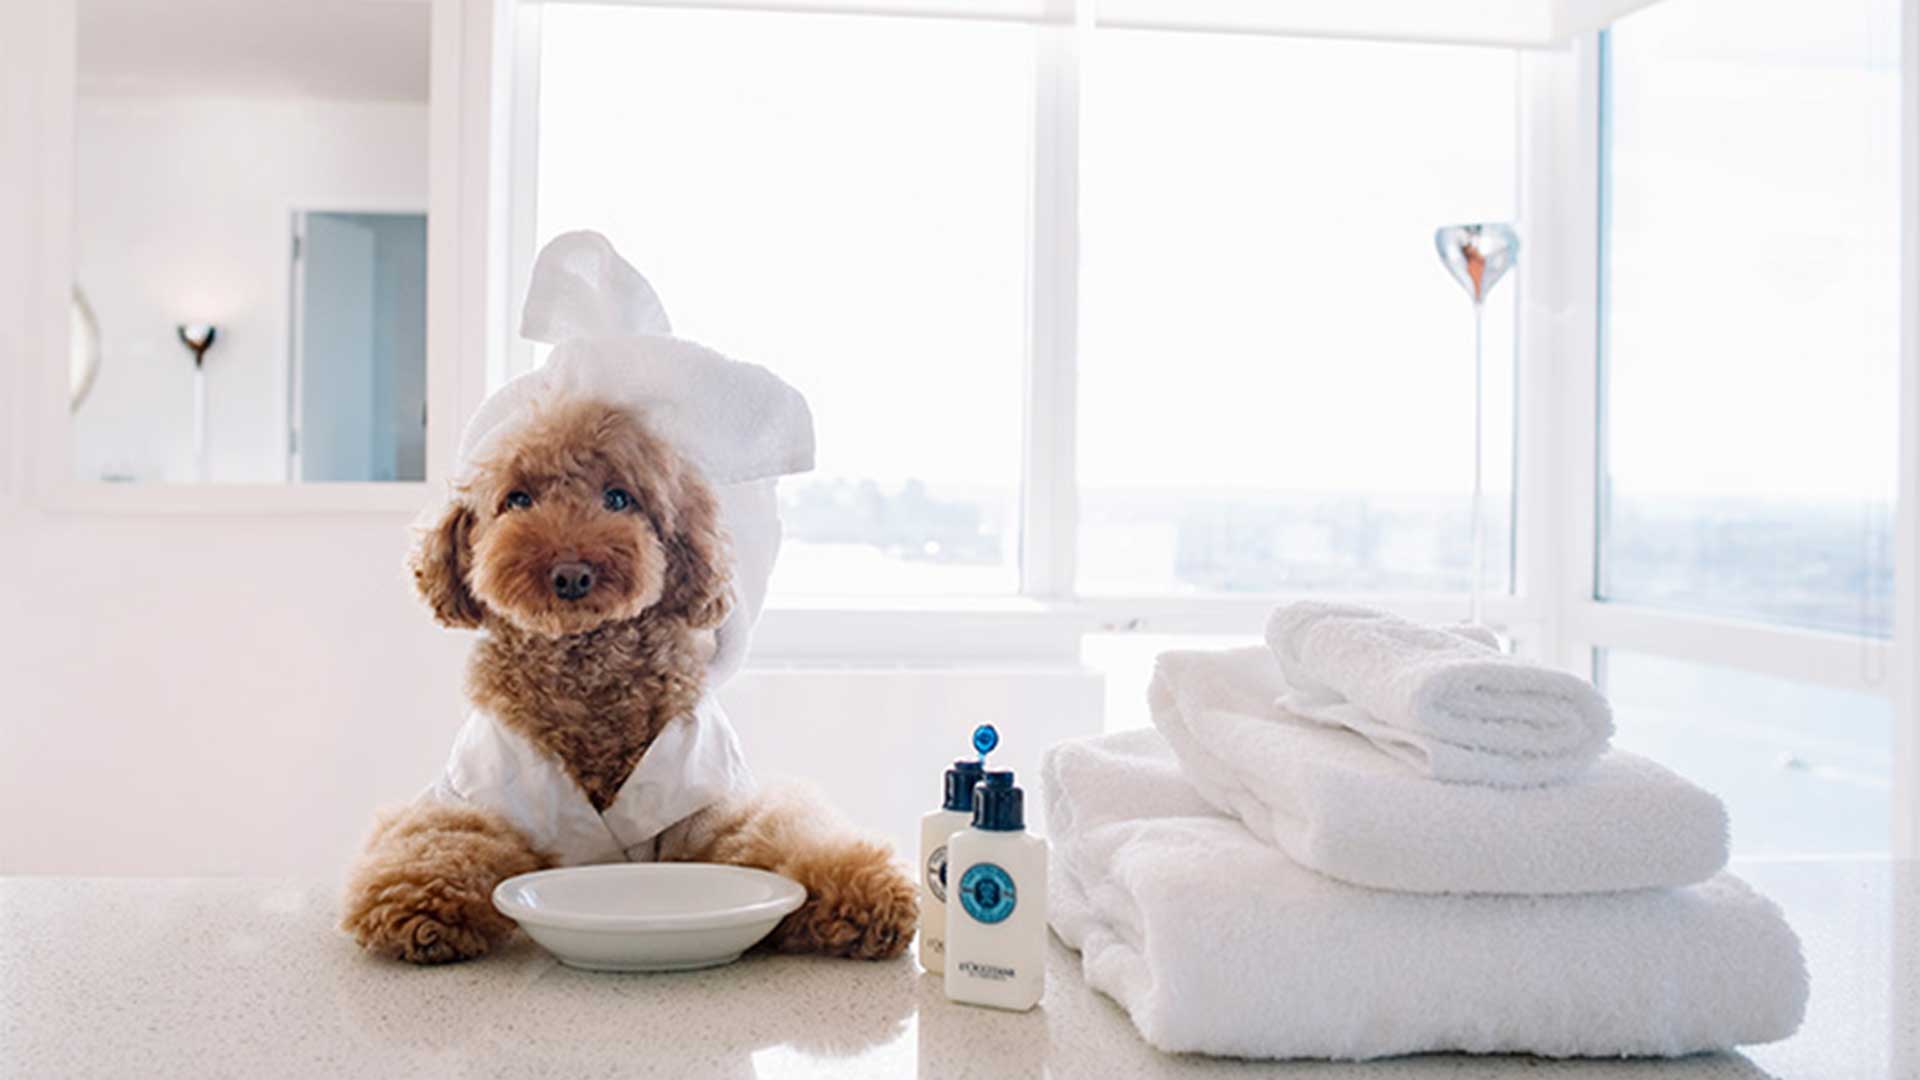 Rising Demand for Pet Hotels Driven by Luxury Amenities and Natural & Organic Products: Future Market Insights